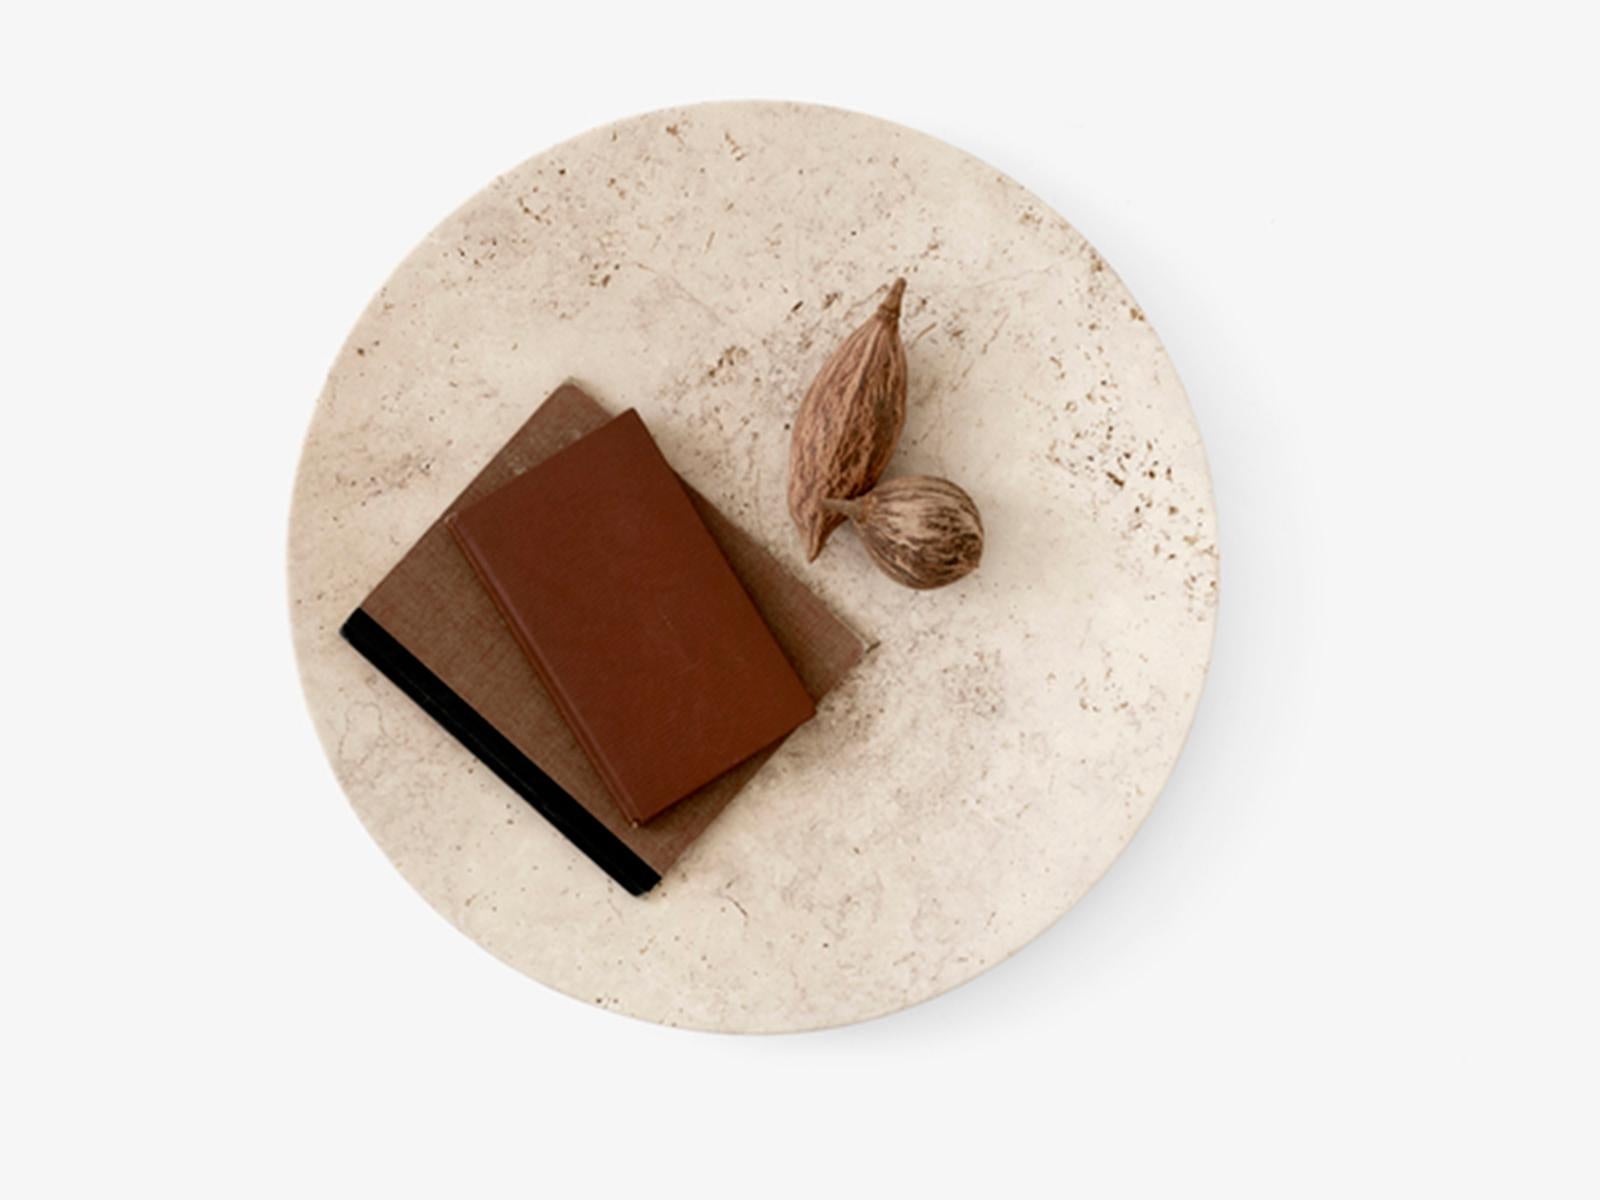 Designed by Space Copenhagen, this hand-polished plate sits within the Collect series, a curated line of beautifully crafted soft furnishings and home objects. 
Crafted from beige travertine rock, this plate is carefully polished by hand to achieve